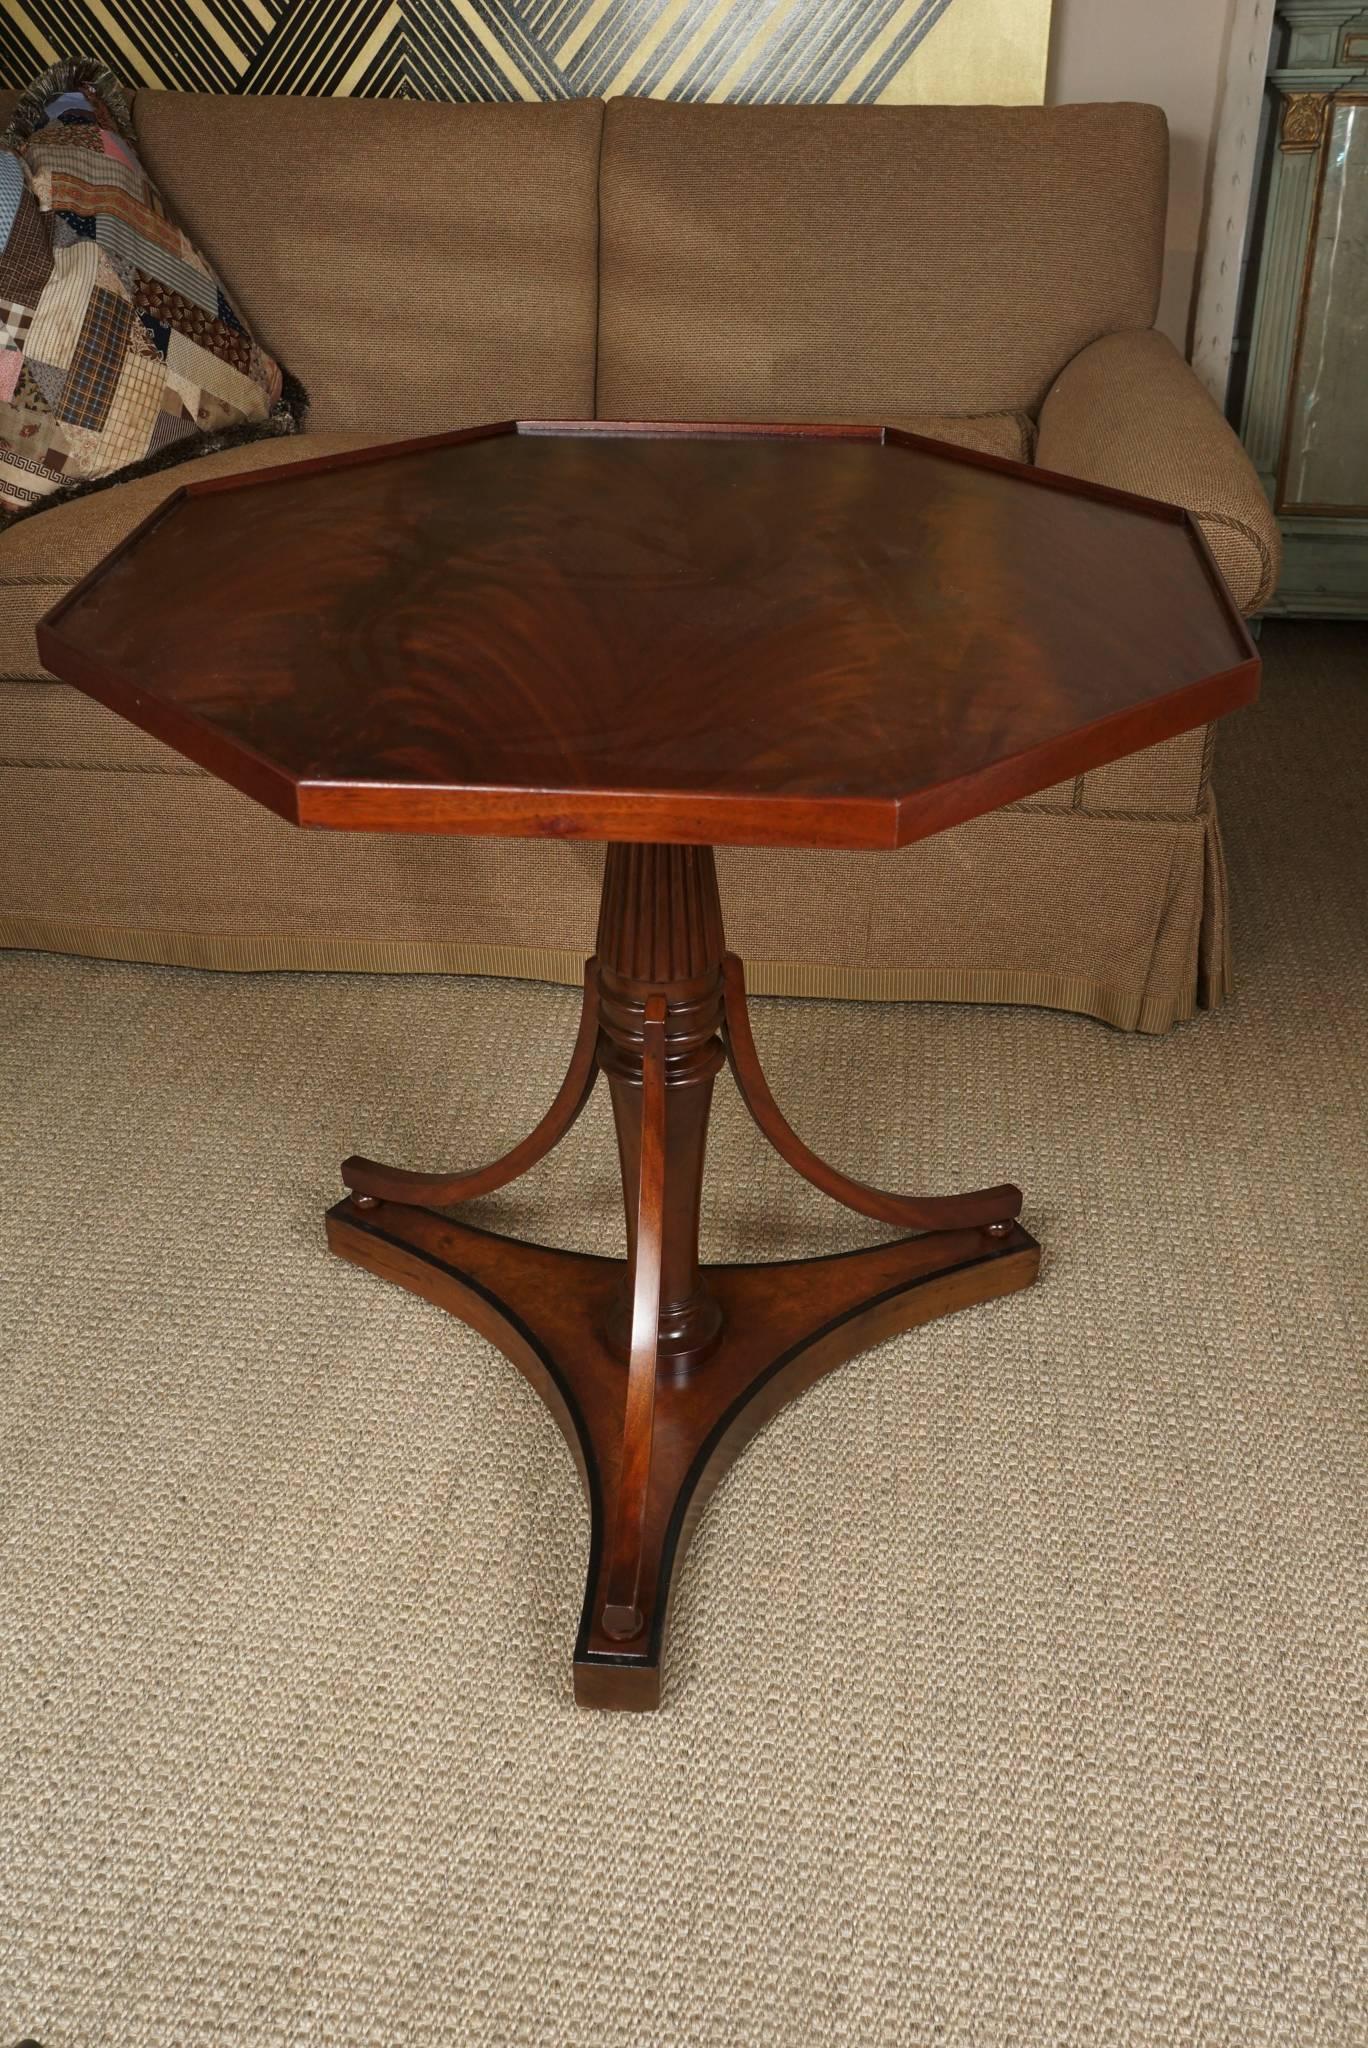 Here is a beautiful Sheraton style table with an octagonal top in a crotch mahogany.
The table has been restored with a new finish and is in excellent condition.
The table has a tripod pedestal base.